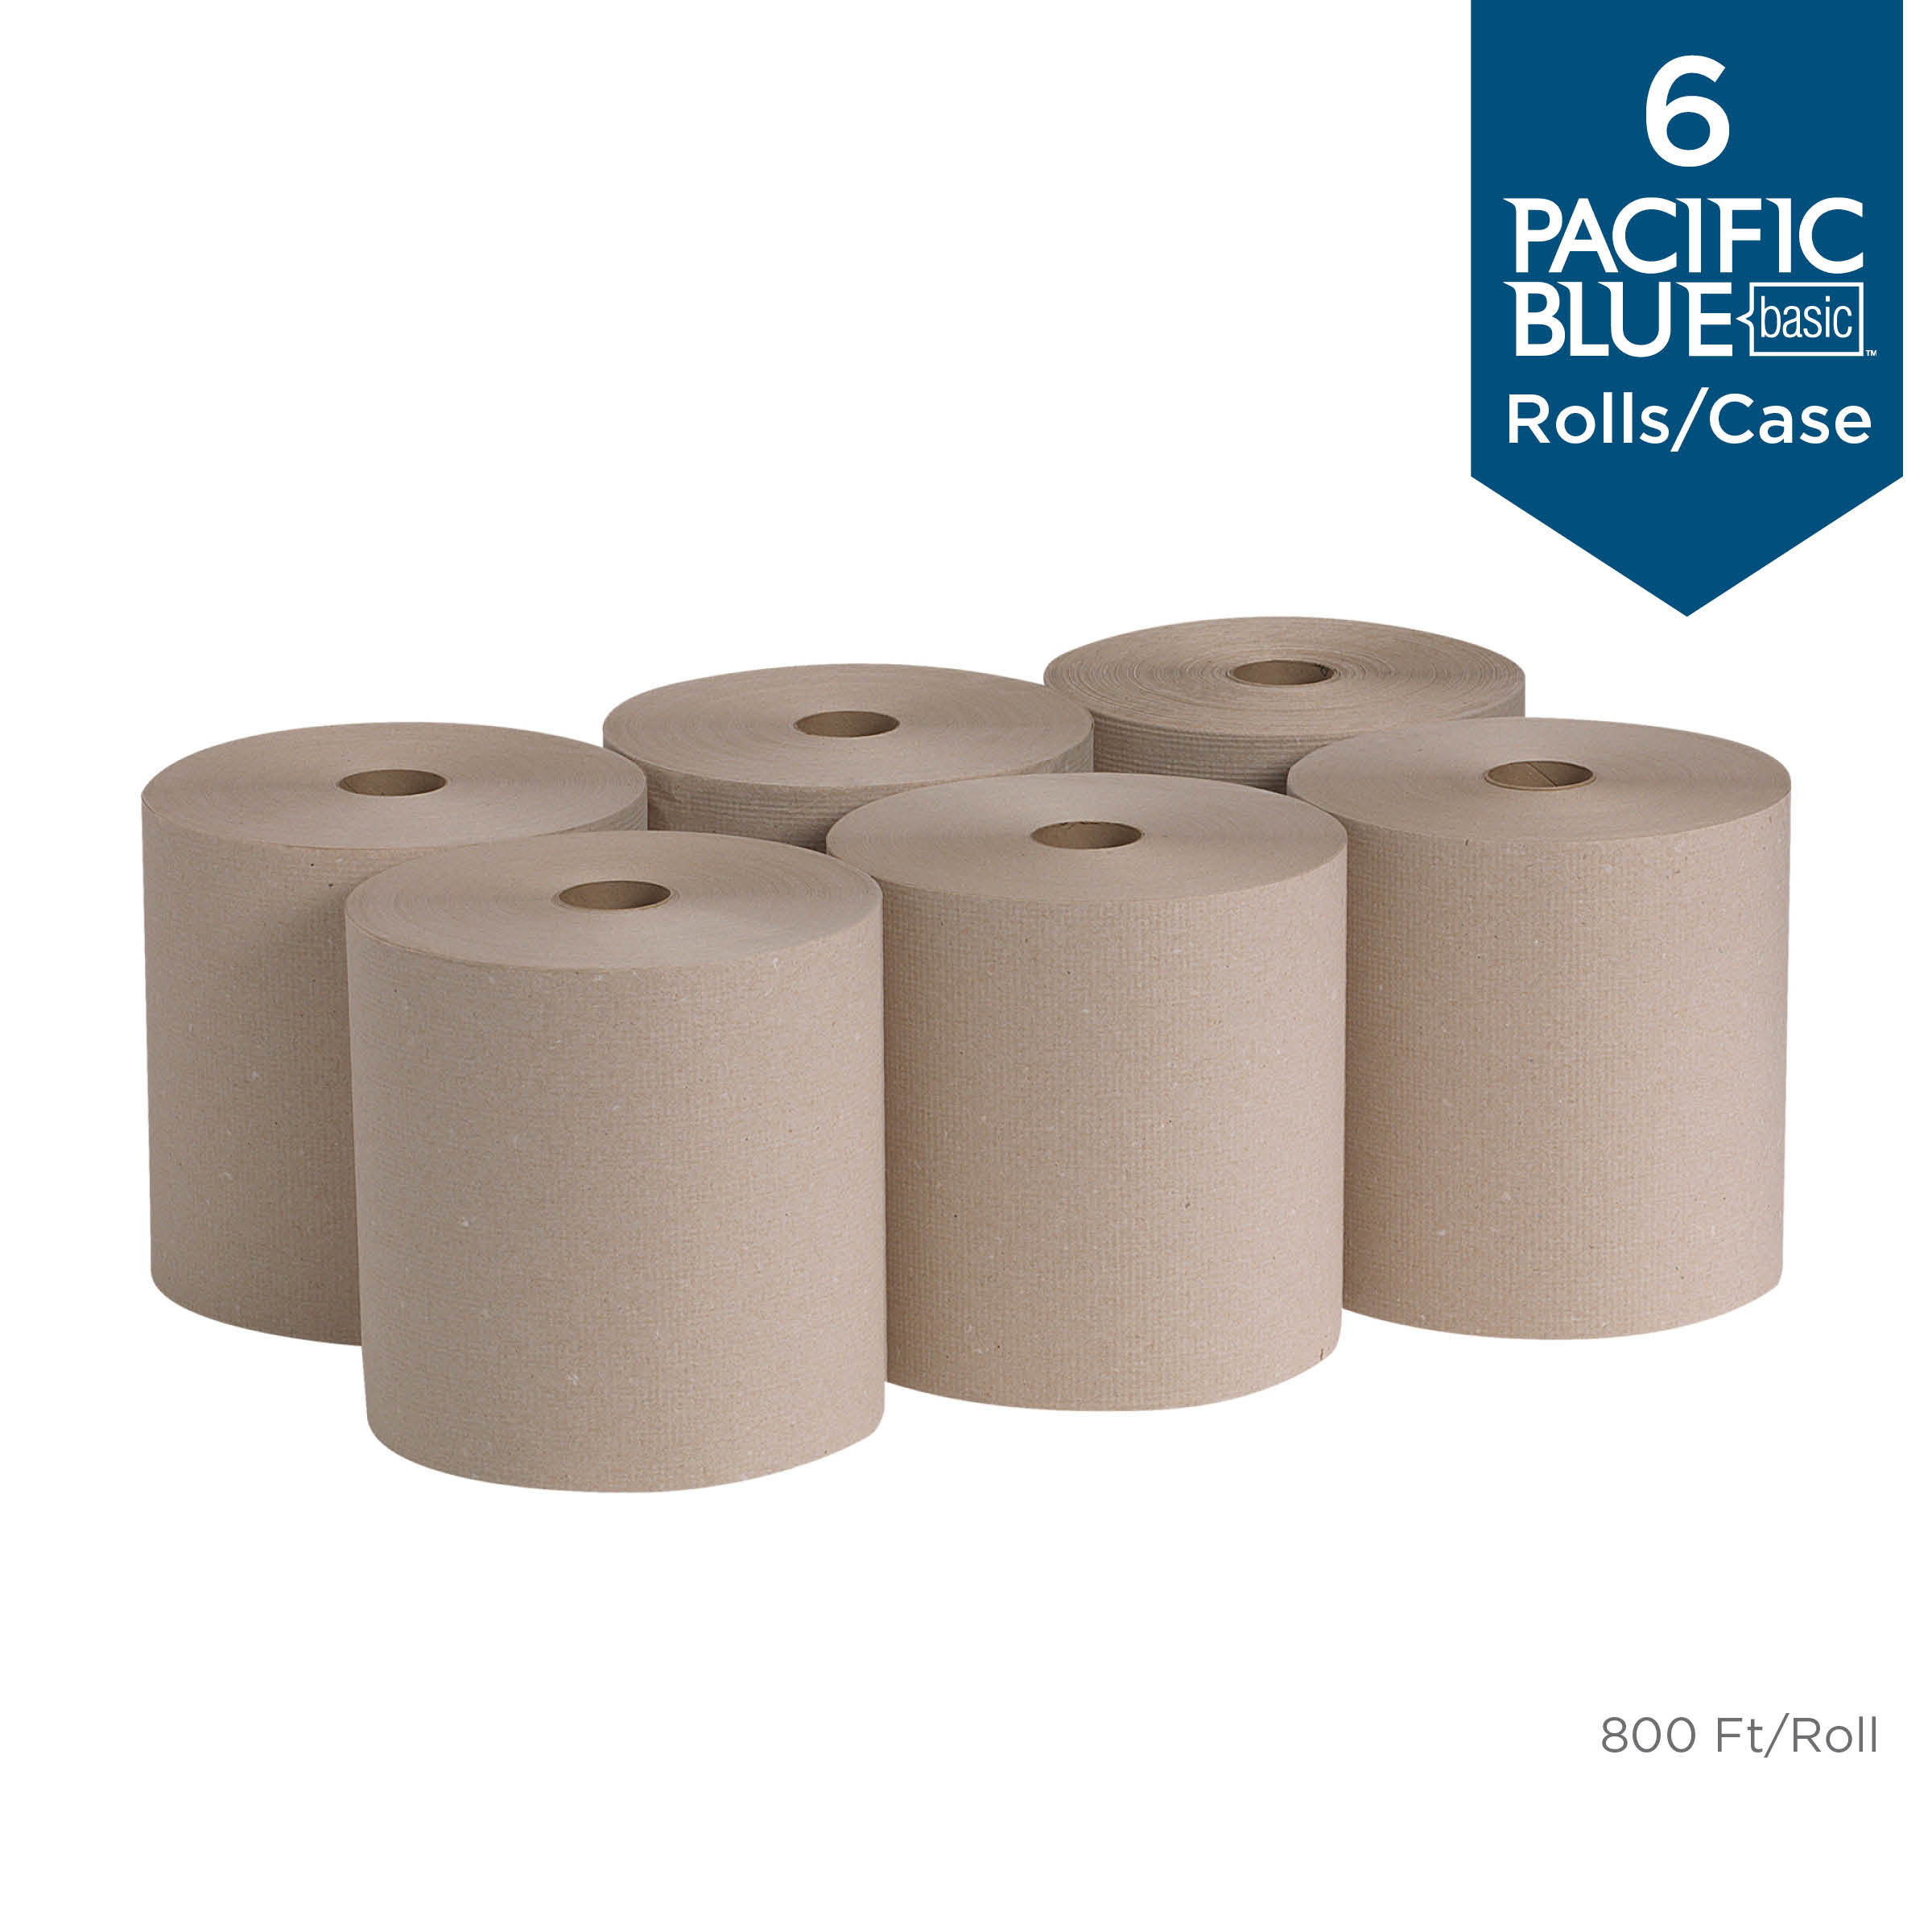 Pacific Blue Basic™ Recycled Hardwound Paper Towel Rolls, 26301, Brown, 6 Count (800 Feet/Roll) - image 1 of 7